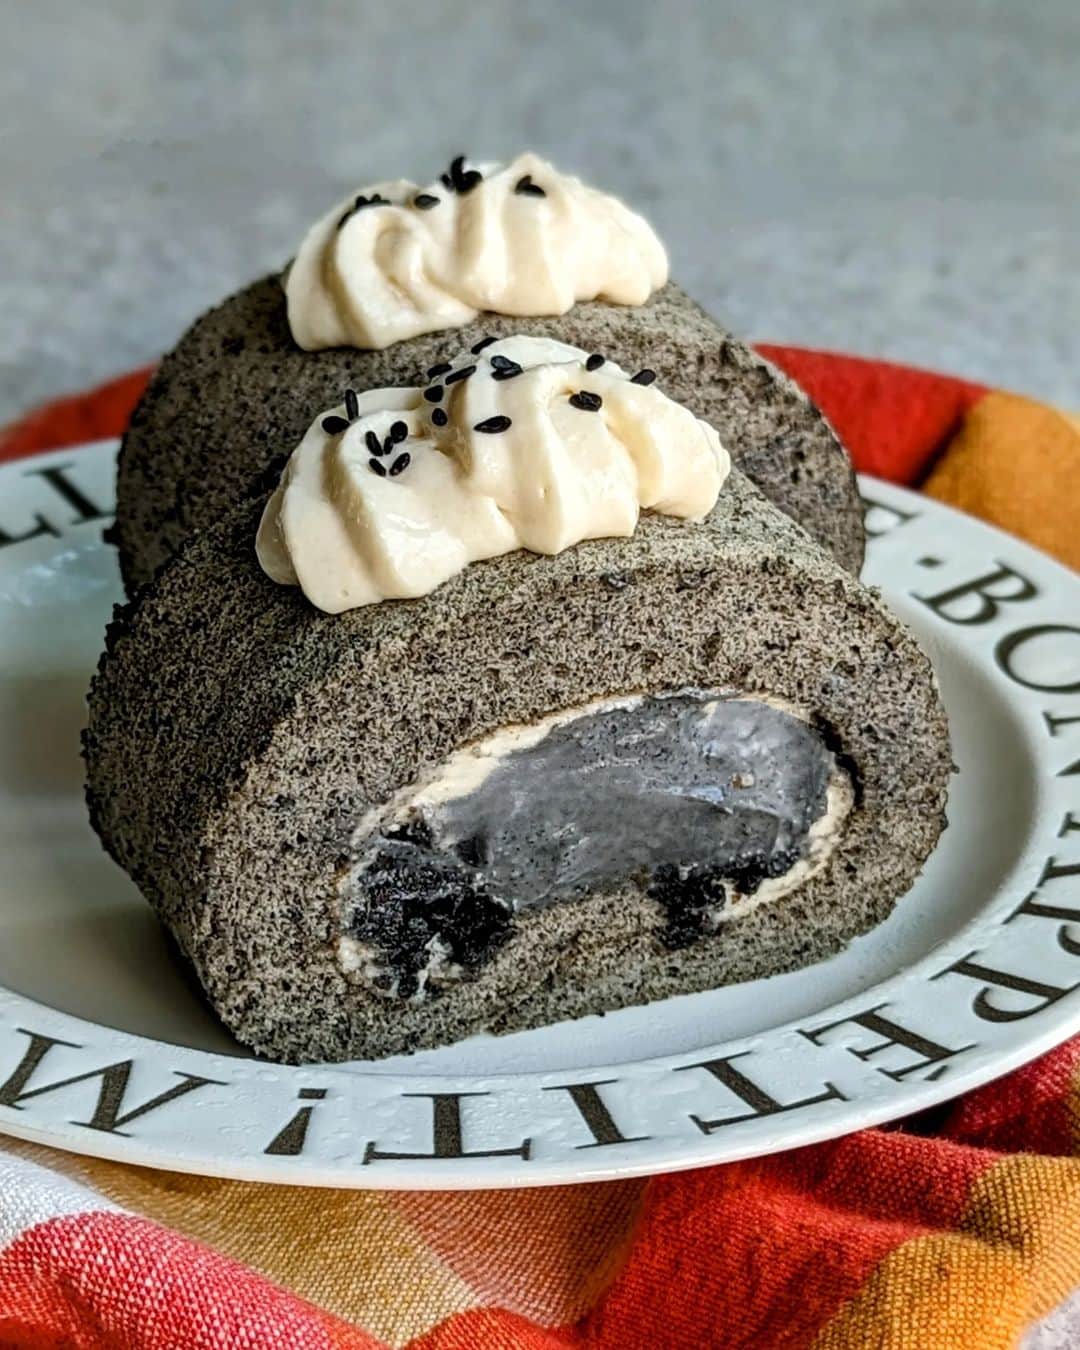 Li Tian の雑貨屋のインスタグラム：「(sold out) Final round!  Black sesame rolls // black sesame sponge, black sesame cream, white sesame cream, black sesame feuilettine //   Sharing a little background before this creation goes into archival mode......these are made with freshly roasted ingredients sourced from taiwan (a mix of 2 diff brands), hence limited quantities available. I also make the crunchy feuilettine from scratch, rather than buy ready made ones. This adds on to the prep work, excluding the early 4am routine to complete each batch order. Is it worth it? Well, I guess so. This is one of my family's fav rolls and hence putting it out for sales so that more people can try 😊  Self collection 2pm-4pm on 13 May (AMK area) or arranged own delivery. Slot is only confirmed upon payment. 1 roll of 6pcs - $42   Order link can be found in profile page.  #dairycreamkitchen #singapore #desserts #sgdessert #sgfoodie #sgfood #foodporn #igsg #ケーキ  #instafood #beautifulcuisines #sgbakes #bonappetit #cafe #cakes #bake #sgcakes #スイーツ #feedfeed #pastry #cake #stayhomesg  #pastry #seasonal #homemade #blacksesame #黑芝麻」